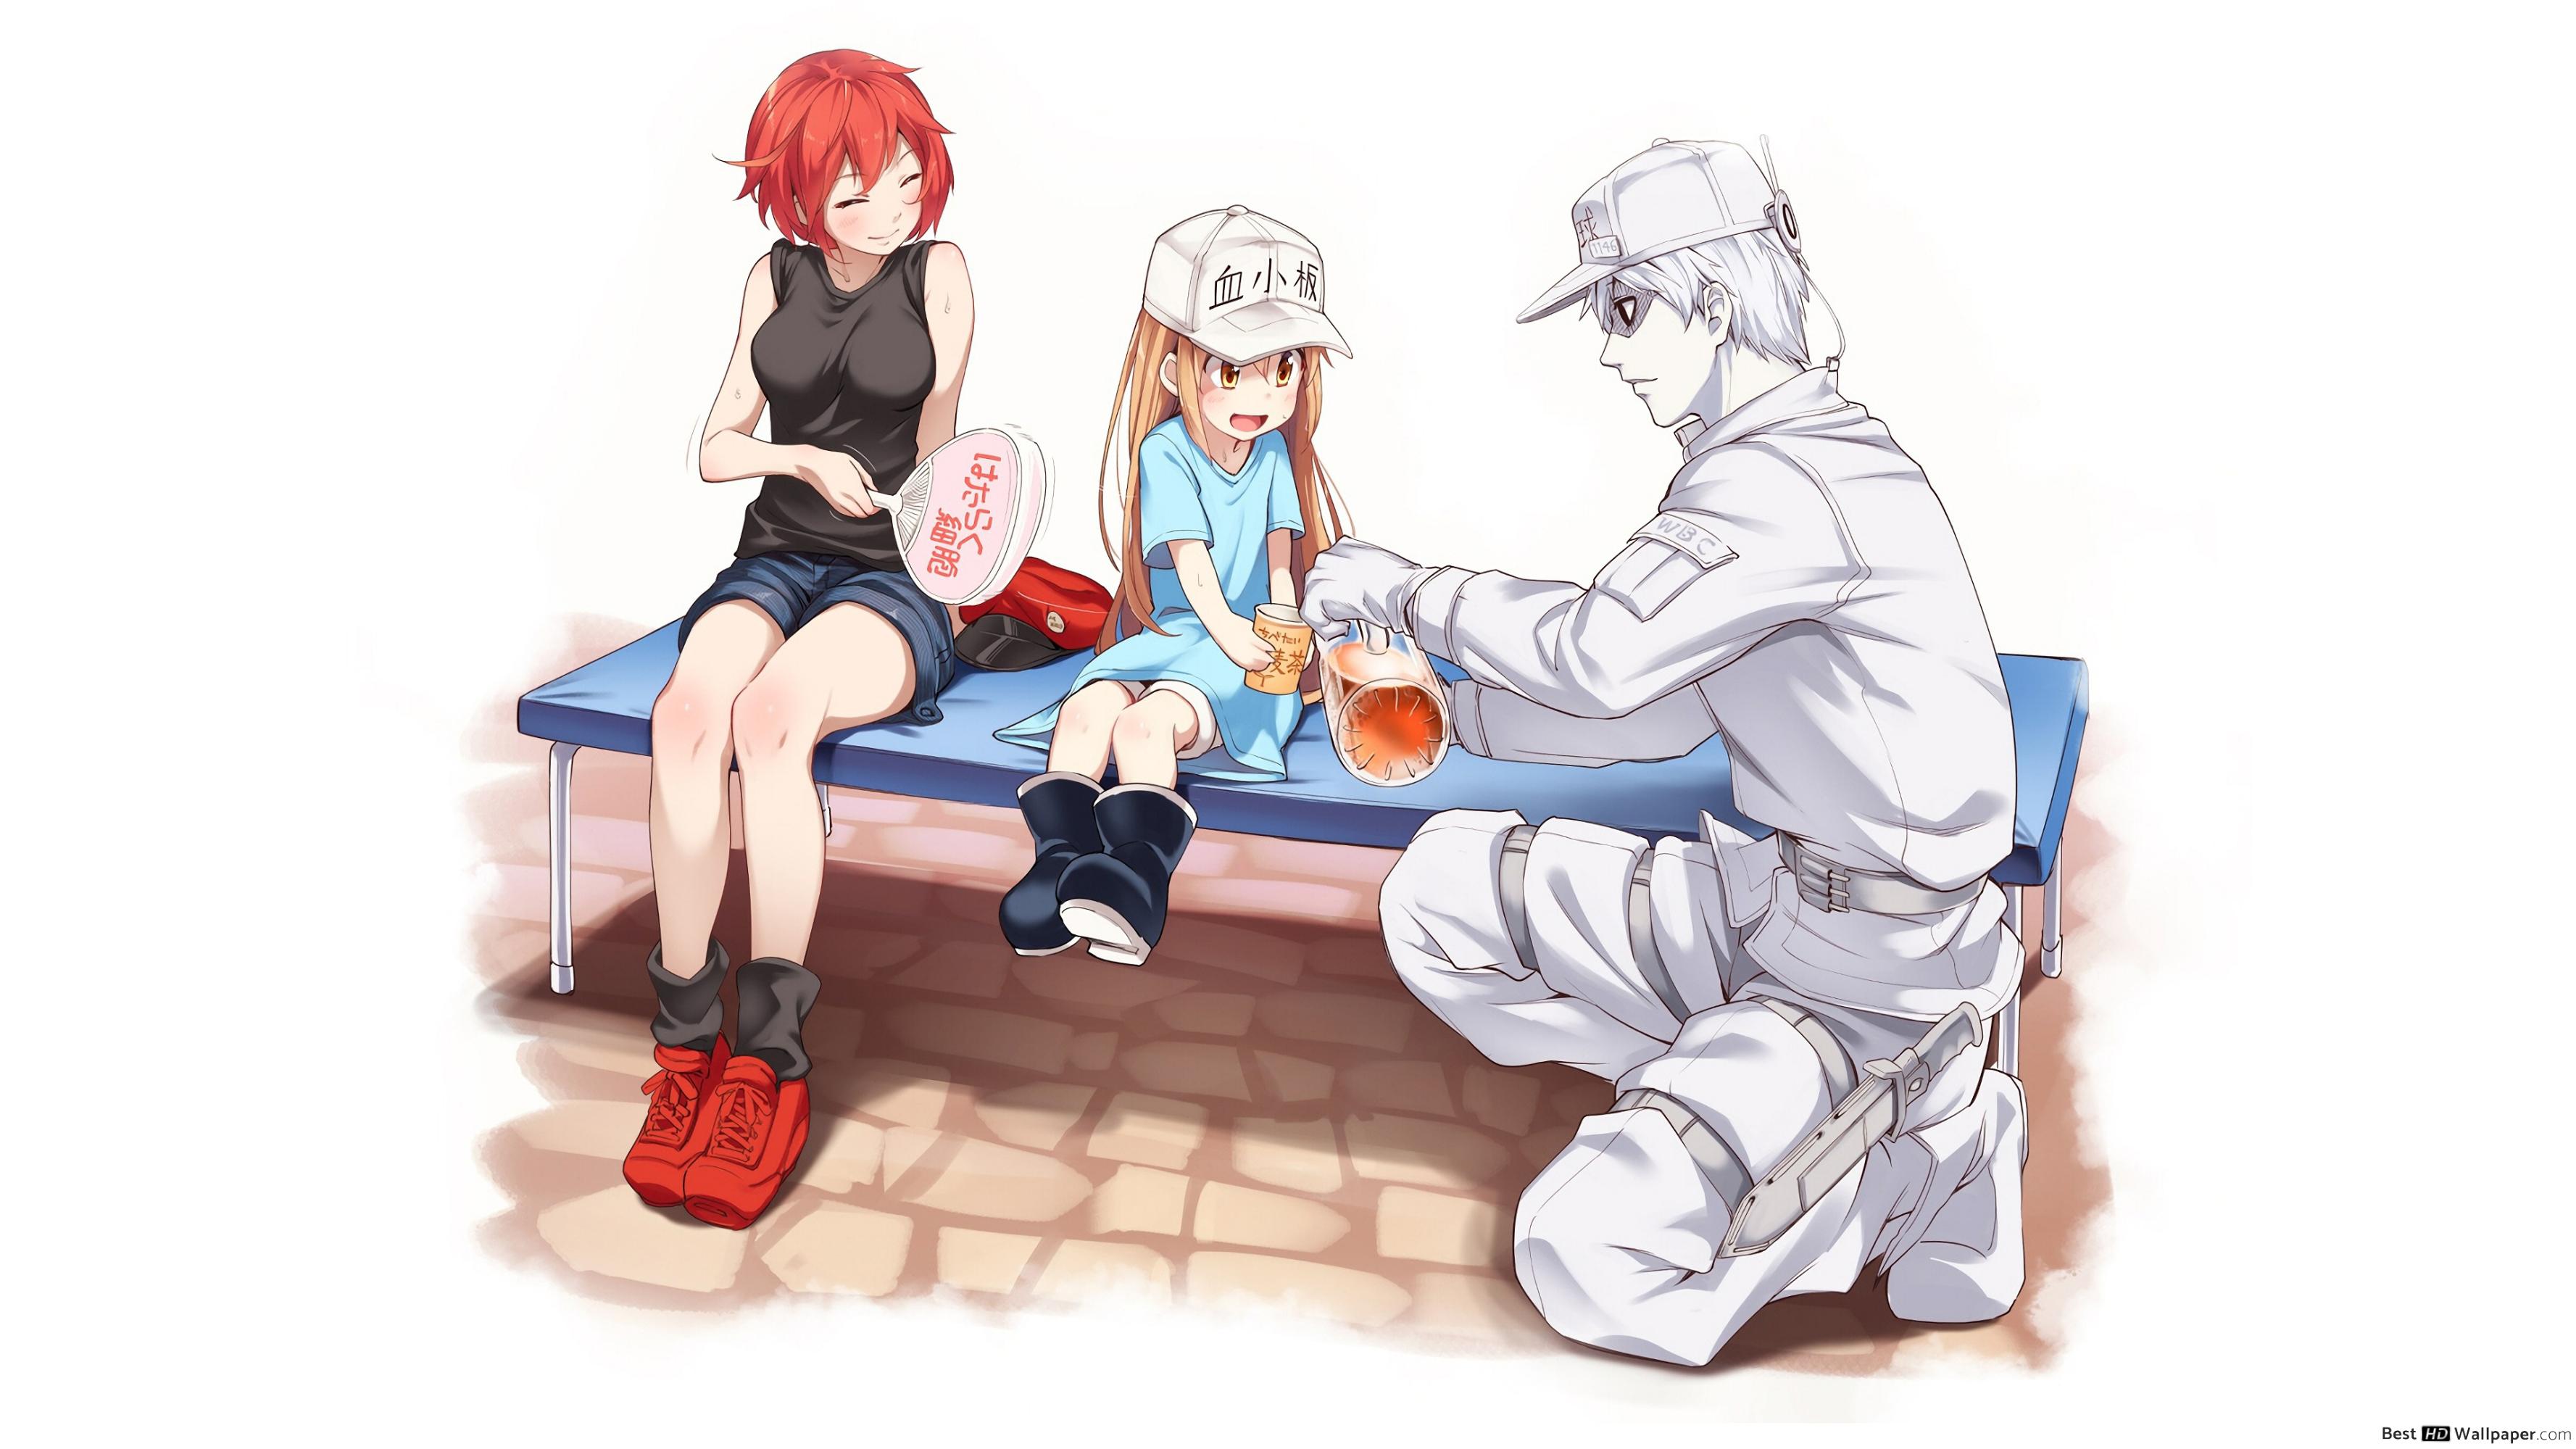 Cells At Work Red Blood Cell White Blood Cell - HD Wallpaper 